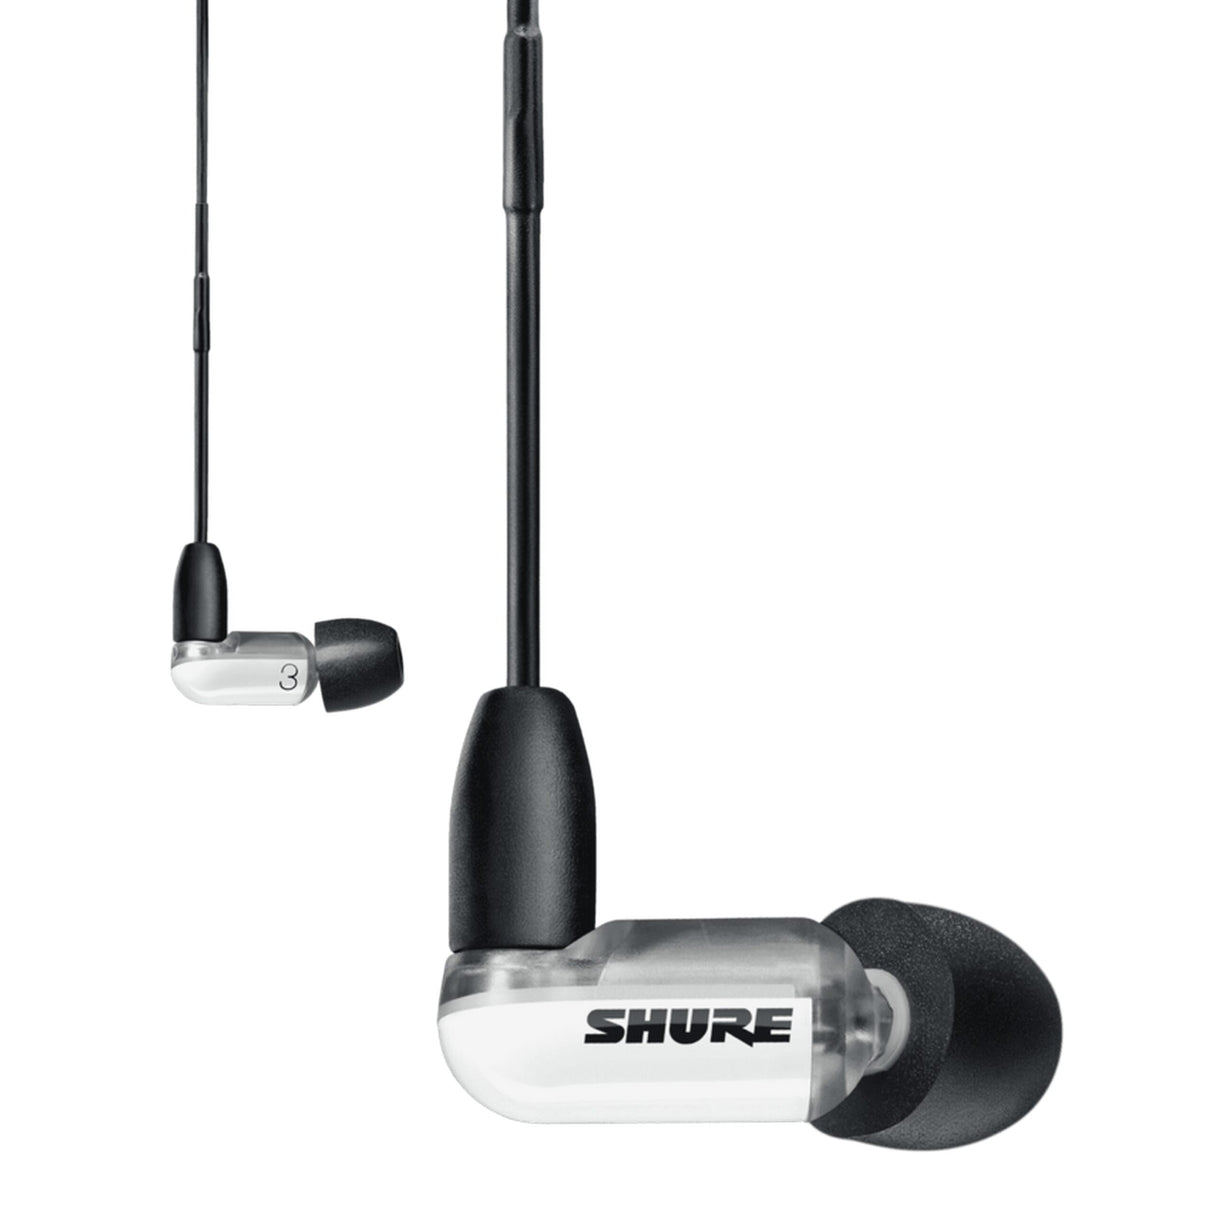 Shure AONIC 3 SE31BAWUNI Wired Sound Isolating In-Ear Headphone, White (Used)